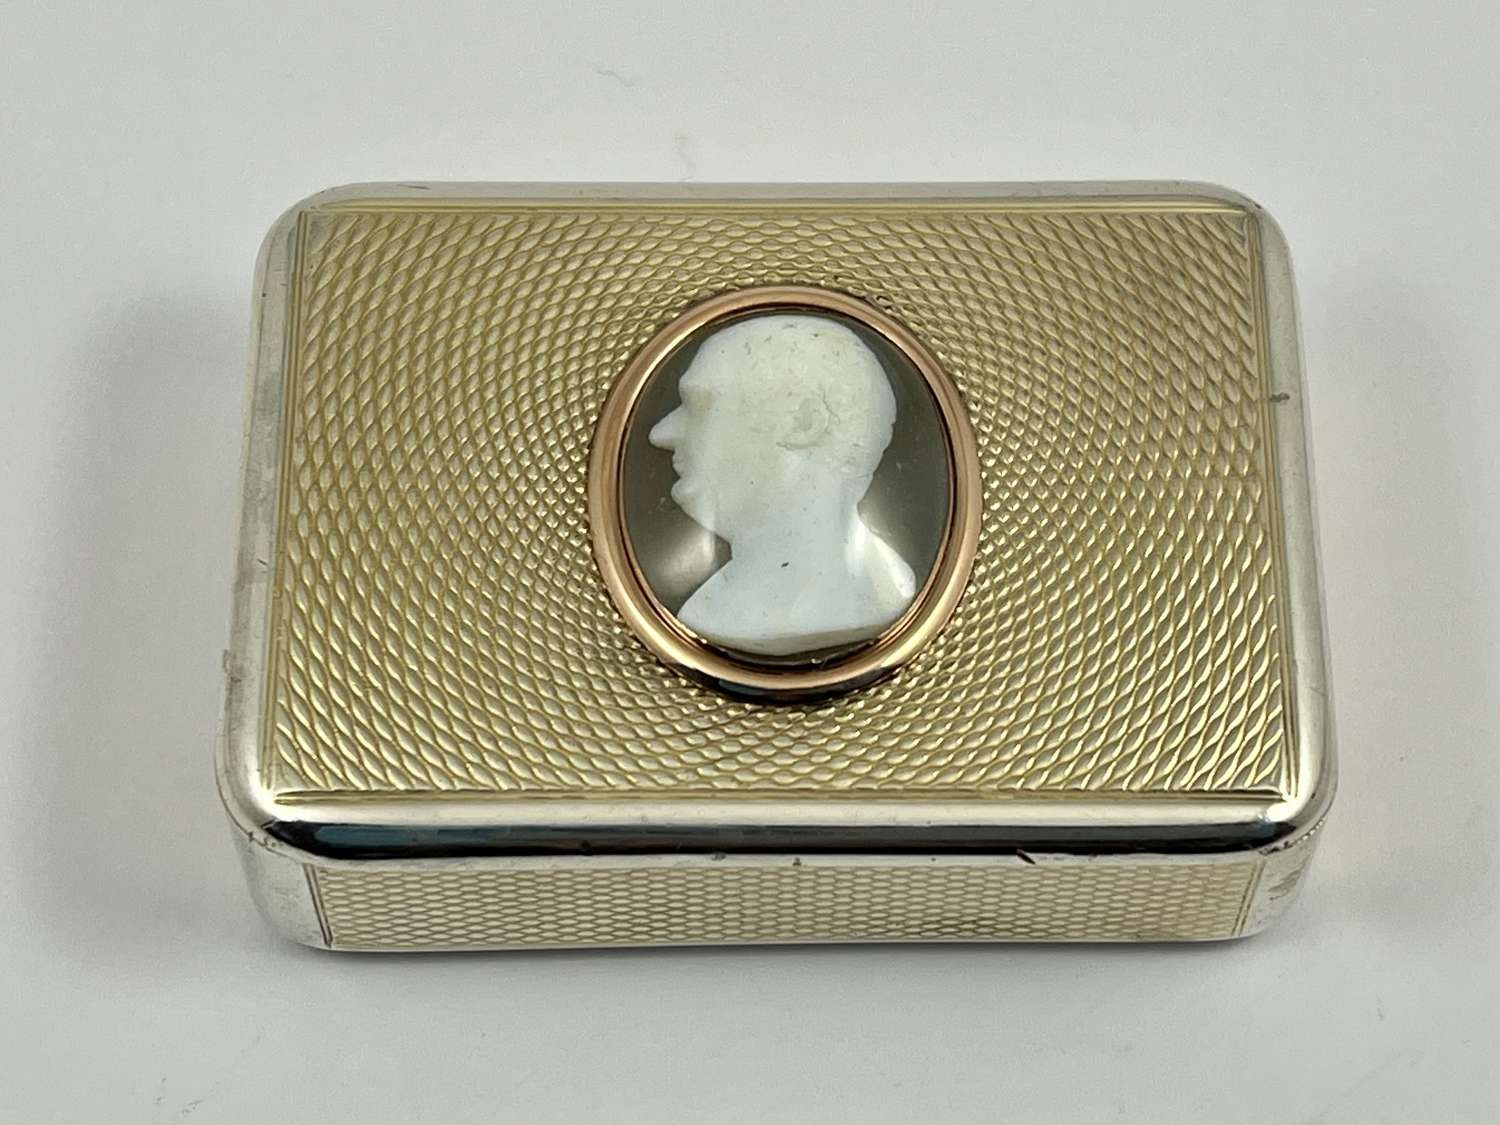 George III silver gilt snuff box with cameo style dome, London 1786